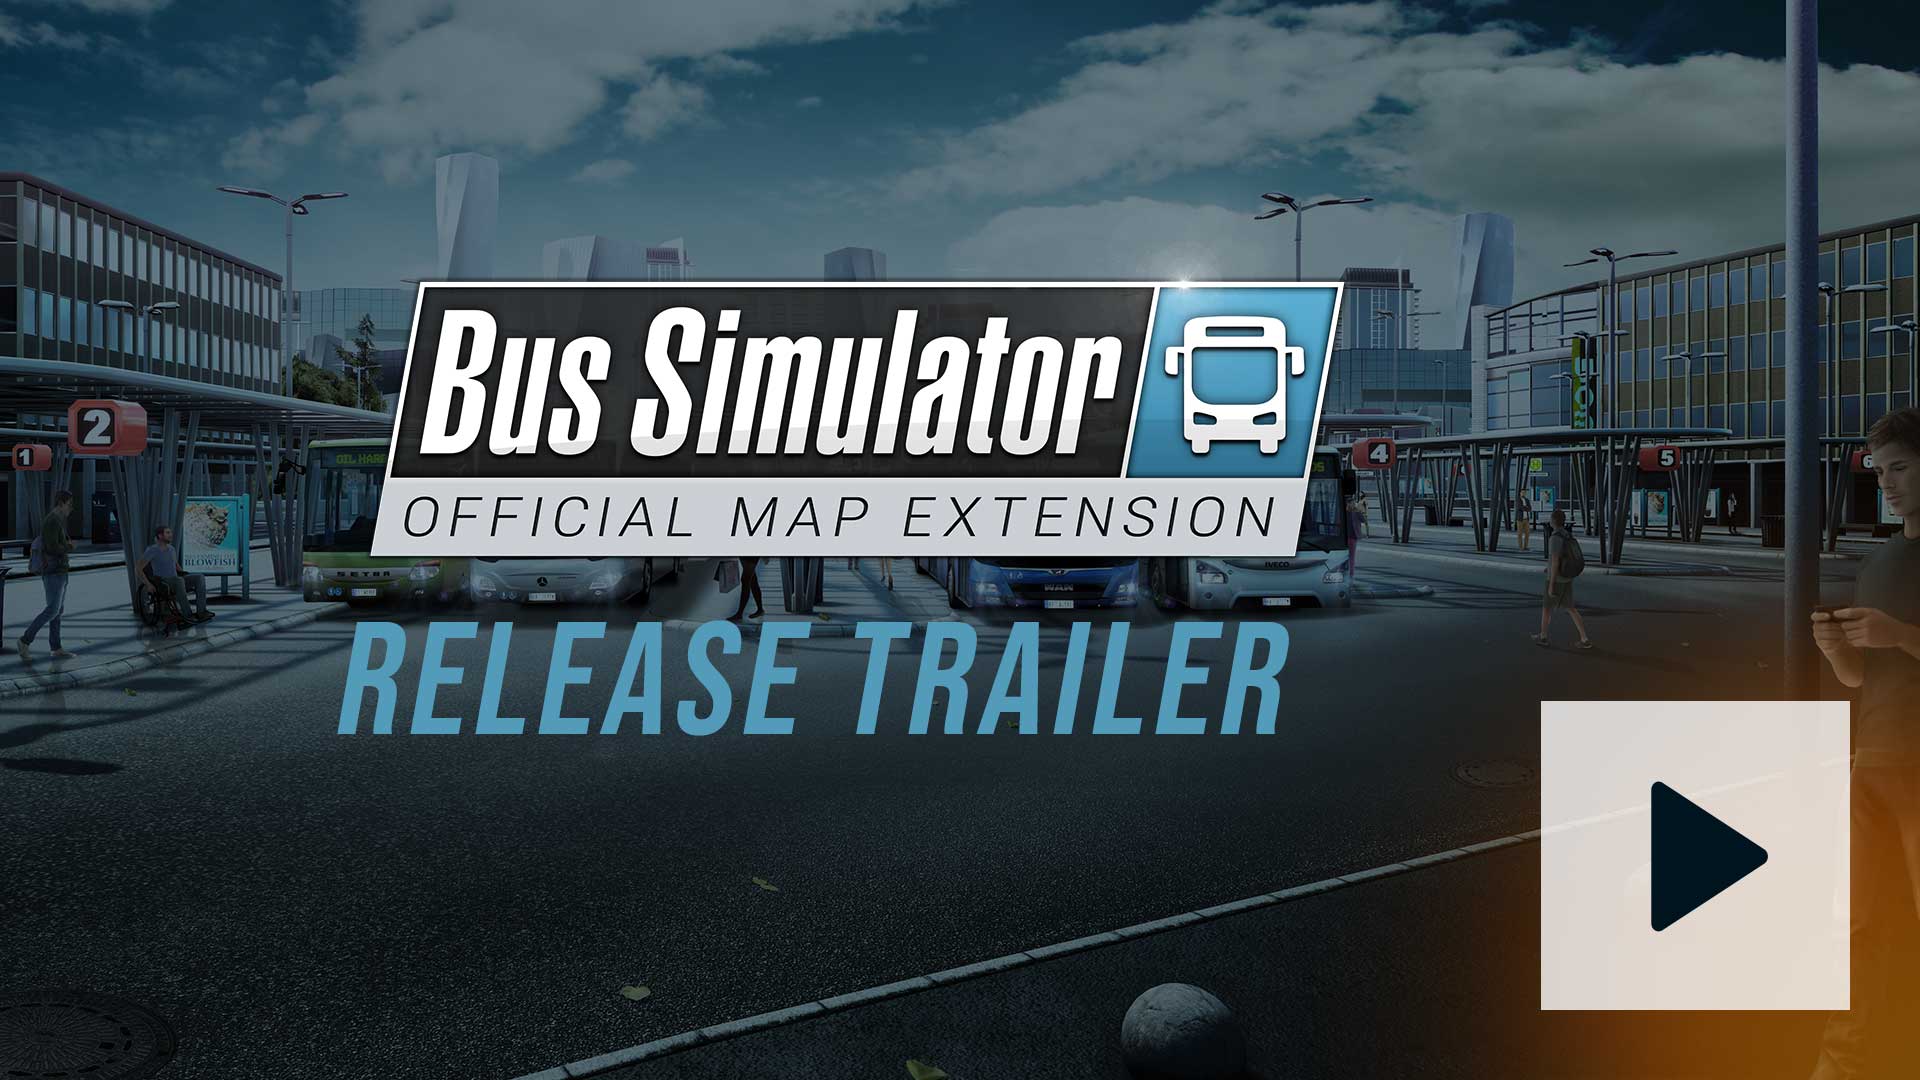 Bus Simulator - Official Map Extension Trailer